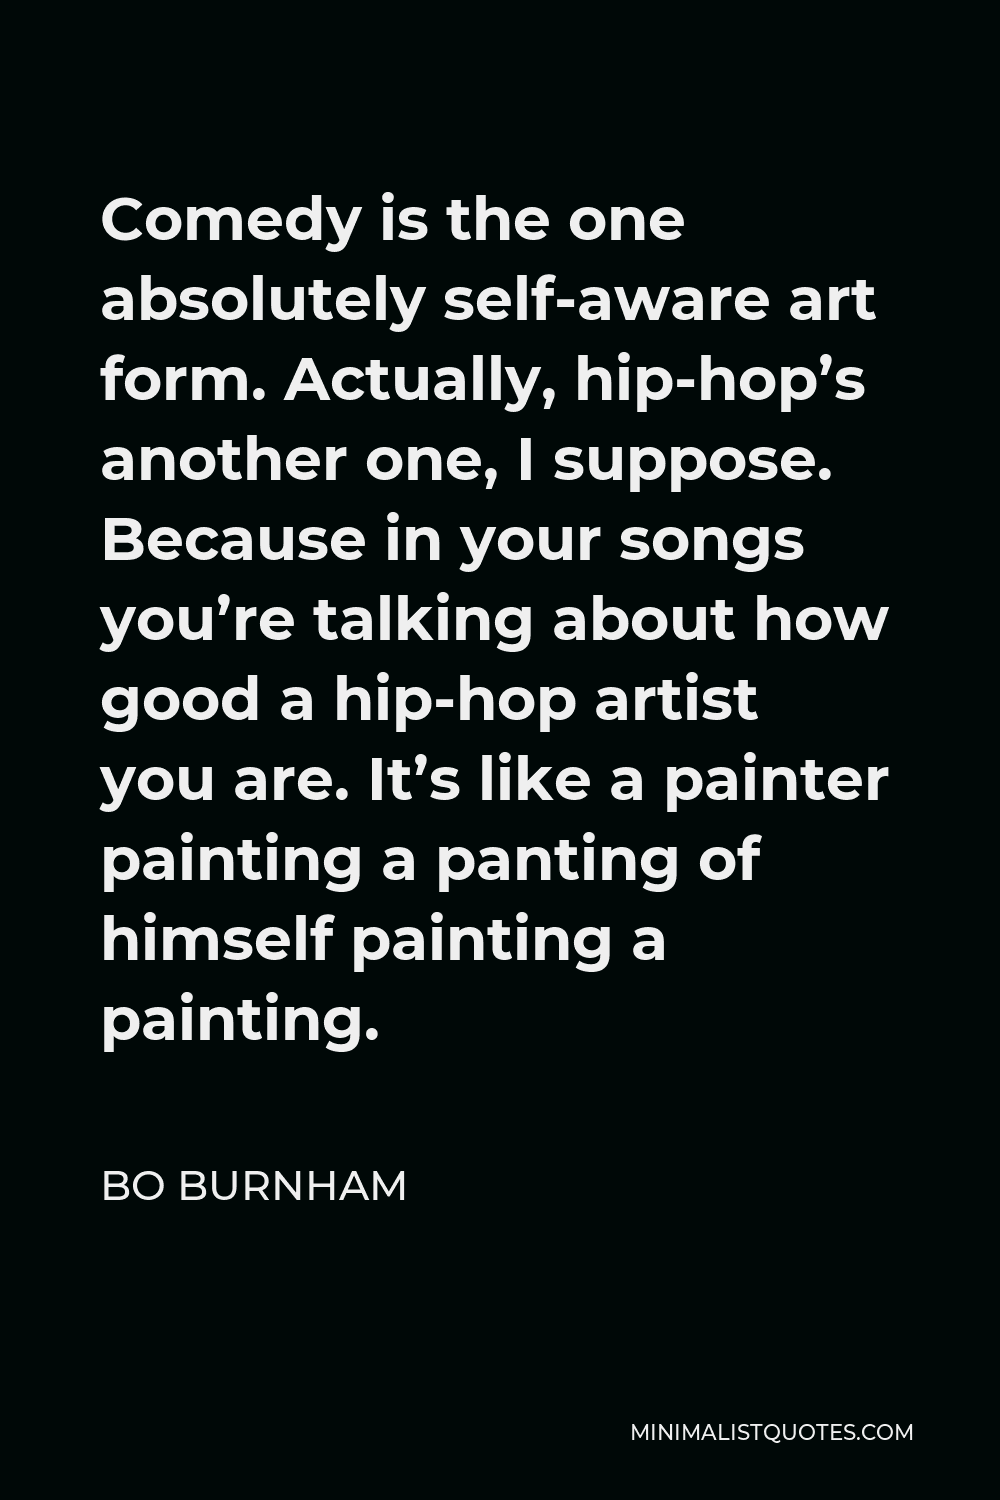 Bo Burnham Quote - Comedy is the one absolutely self-aware art form. Actually, hip-hop’s another one, I suppose. Because in your songs you’re talking about how good a hip-hop artist you are. It’s like a painter painting a panting of himself painting a painting.